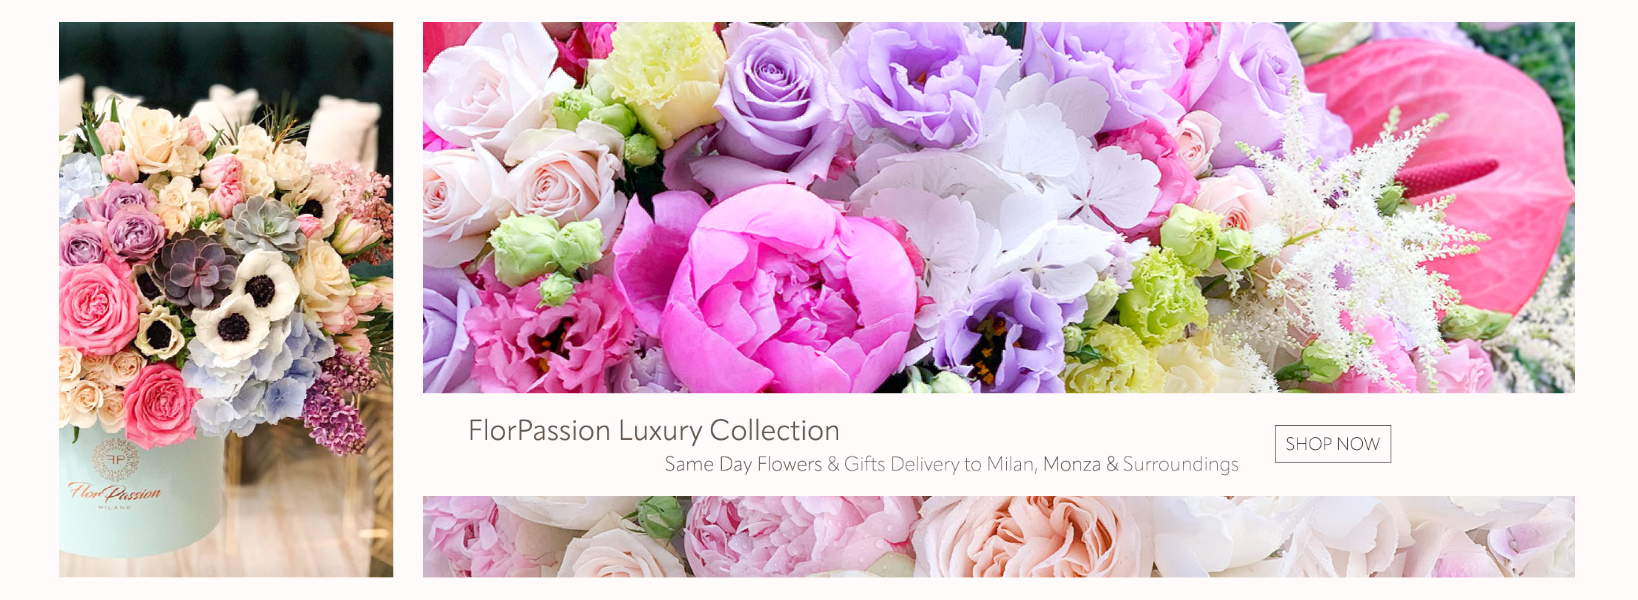 FlorPassion_Luxury_Collection_Same_Day_Flowers_Milan_1_2